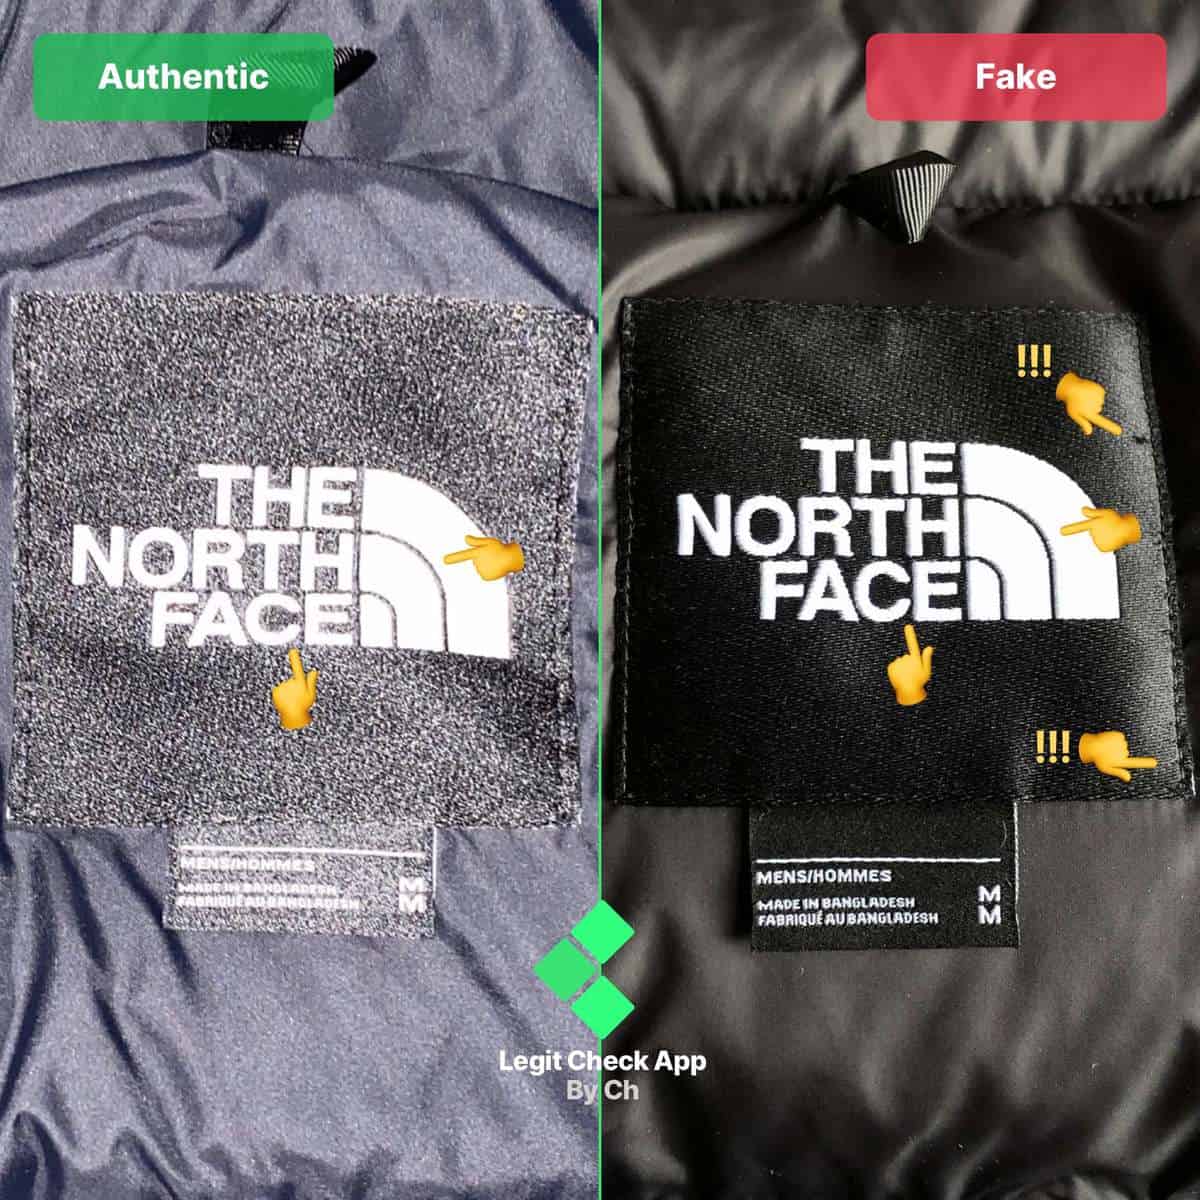 the north face knock off